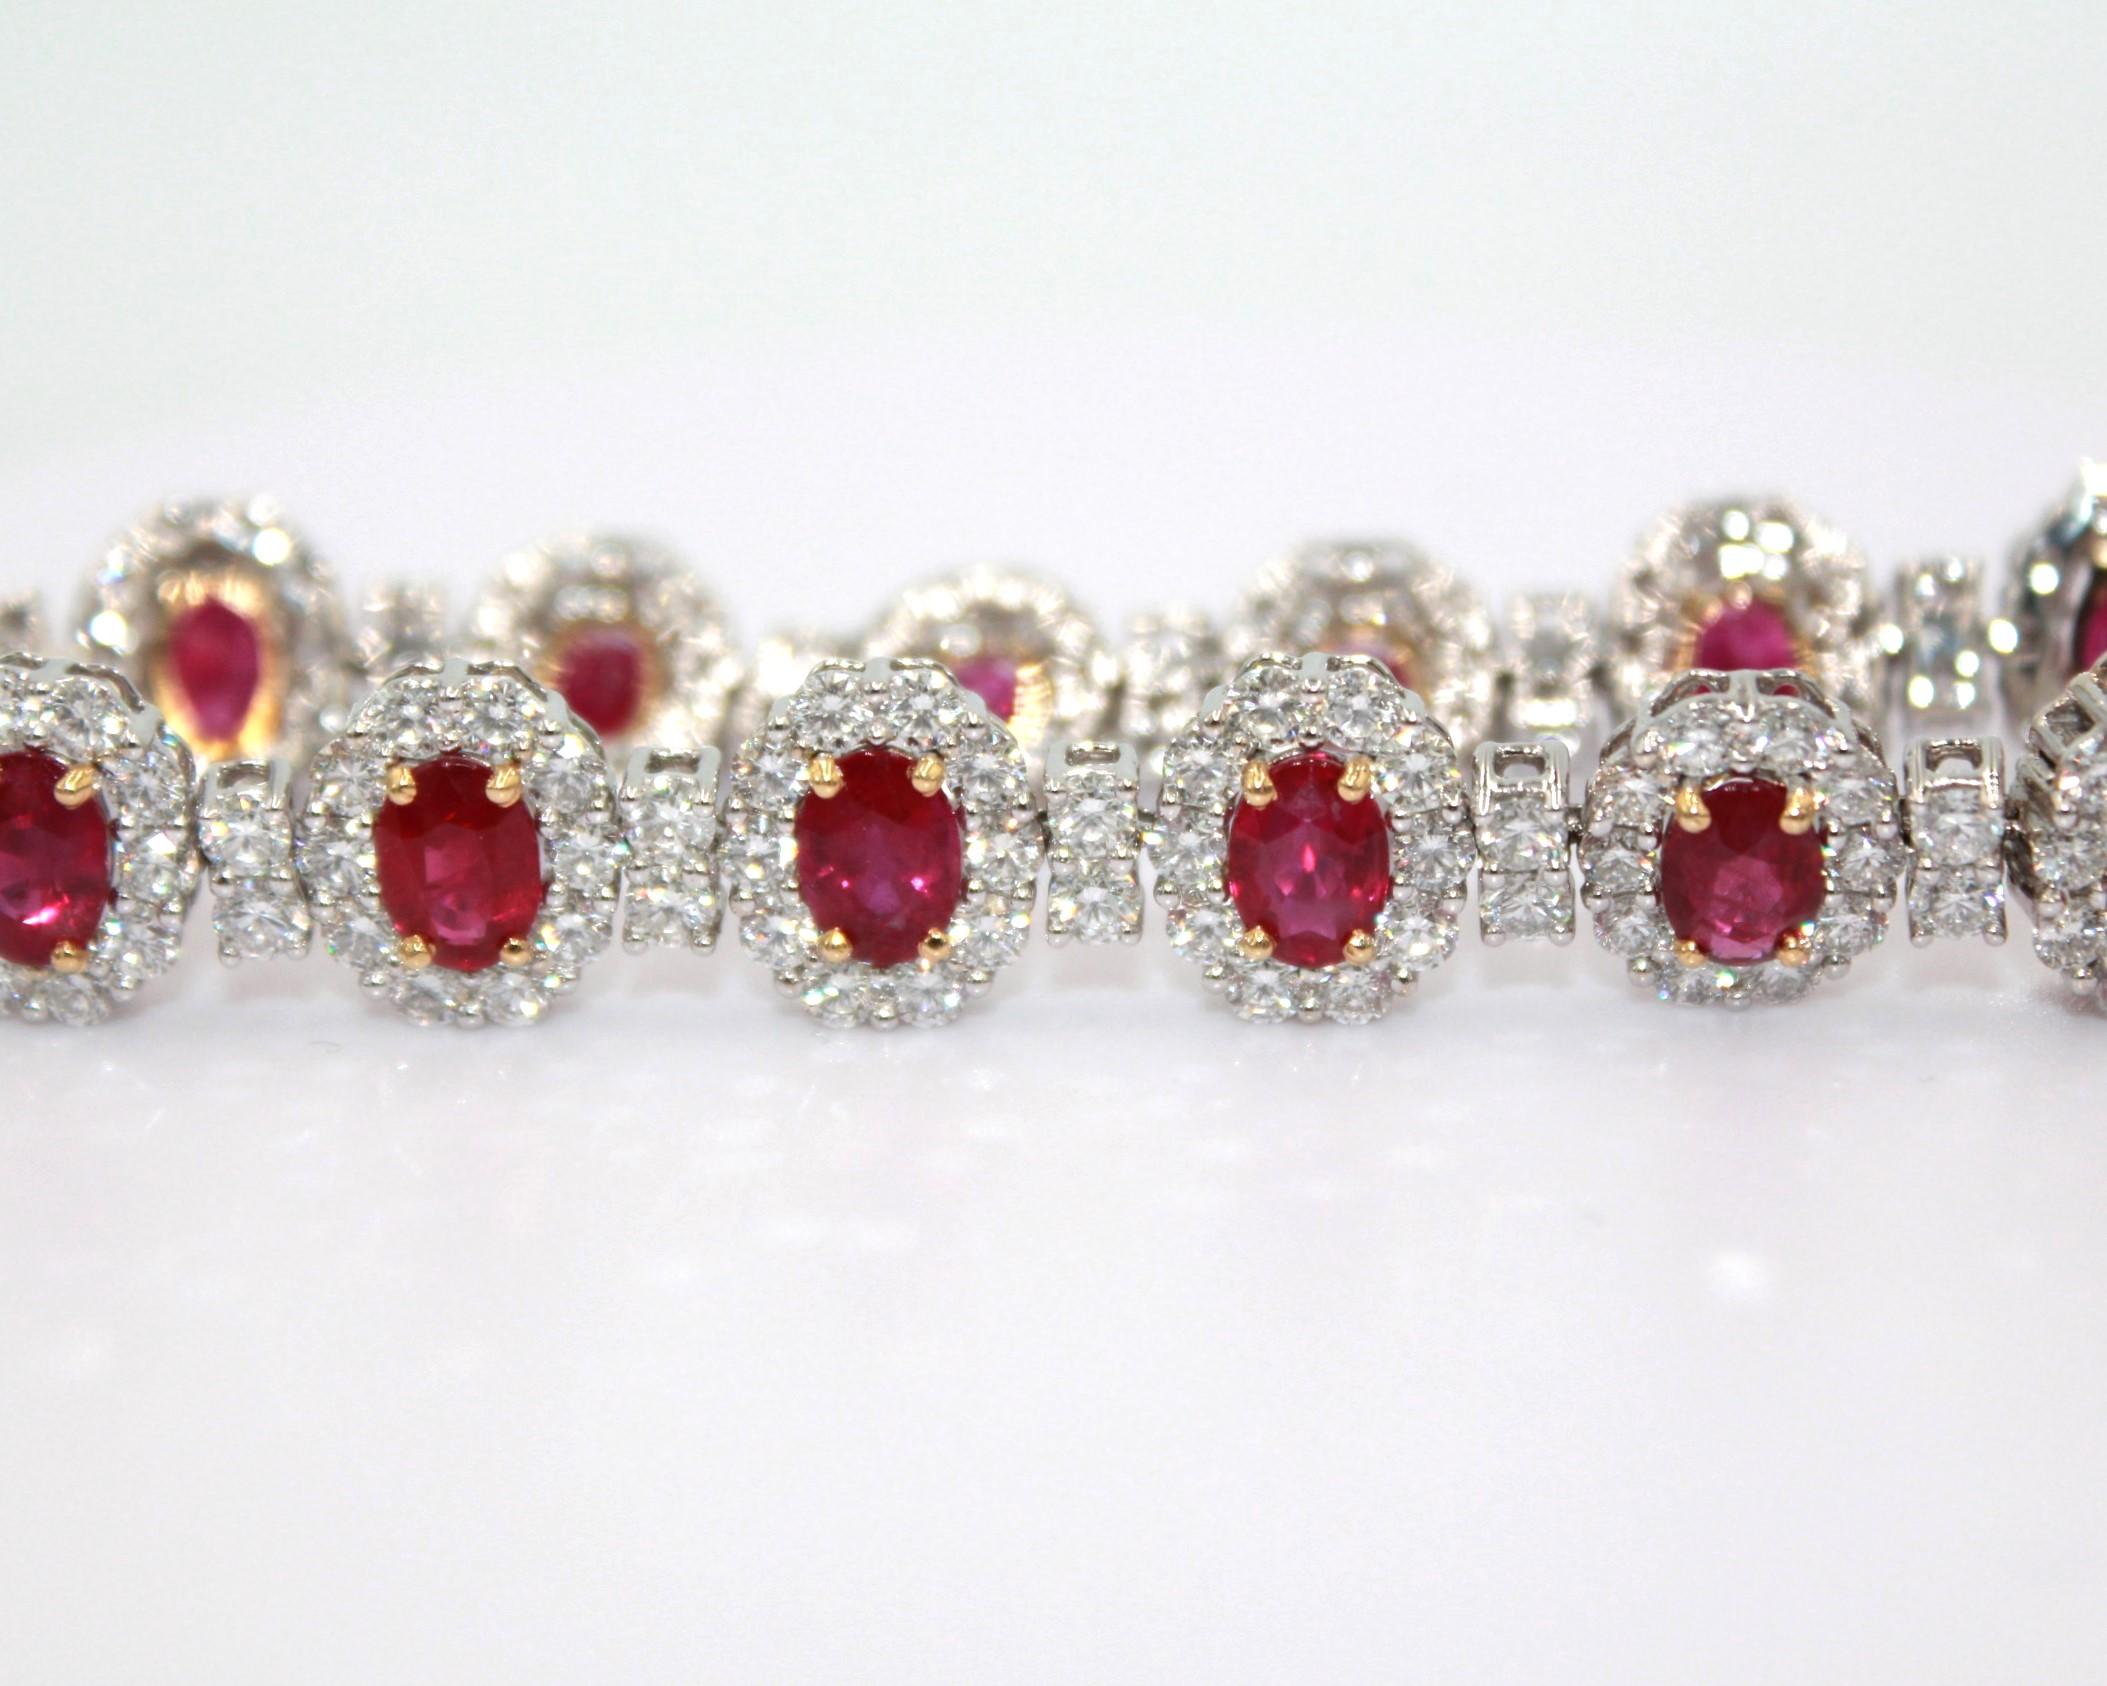 15.03 carats oval Burma Ruby with 168 round diamonds, totaling a diamond weight of 11.30 carats. 

This stunning Ruby & Diamond Bracelet will highlight your uniqueness and elegance. 

Item Details:
- Type: Bracelet
- Metal: 18K Gold

Color Stone